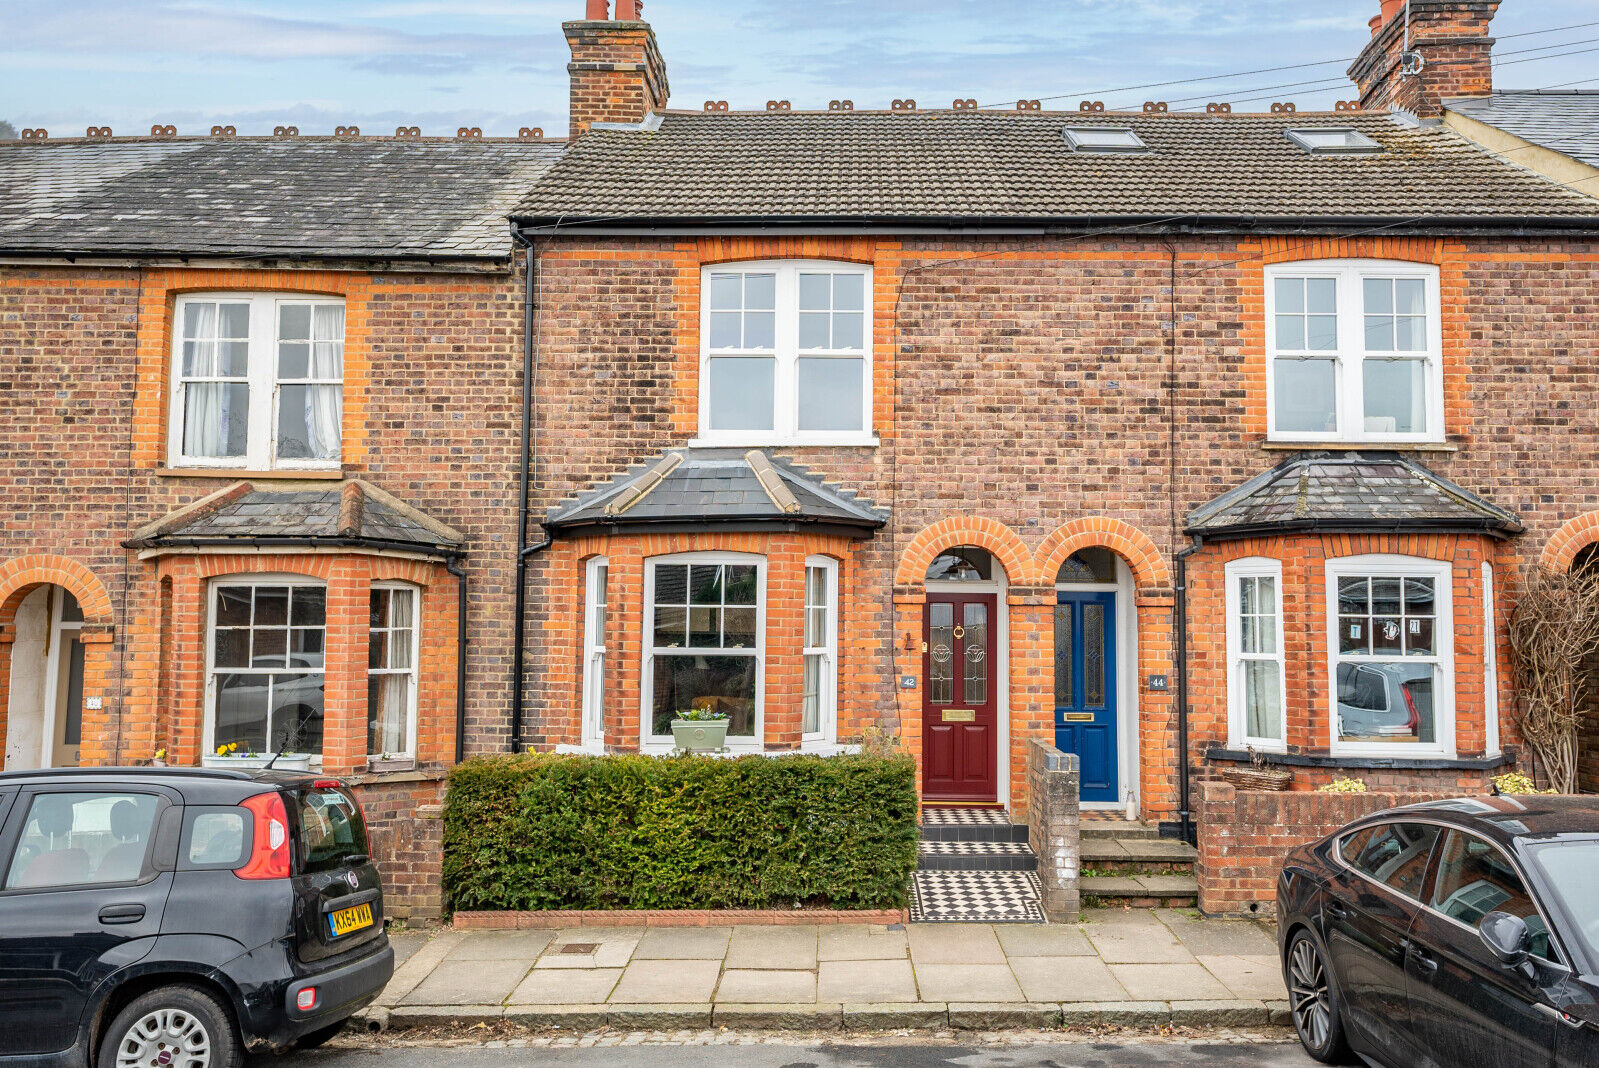 3 bedroom mid terraced house for sale Warwick Road, St. Albans, AL1, main image